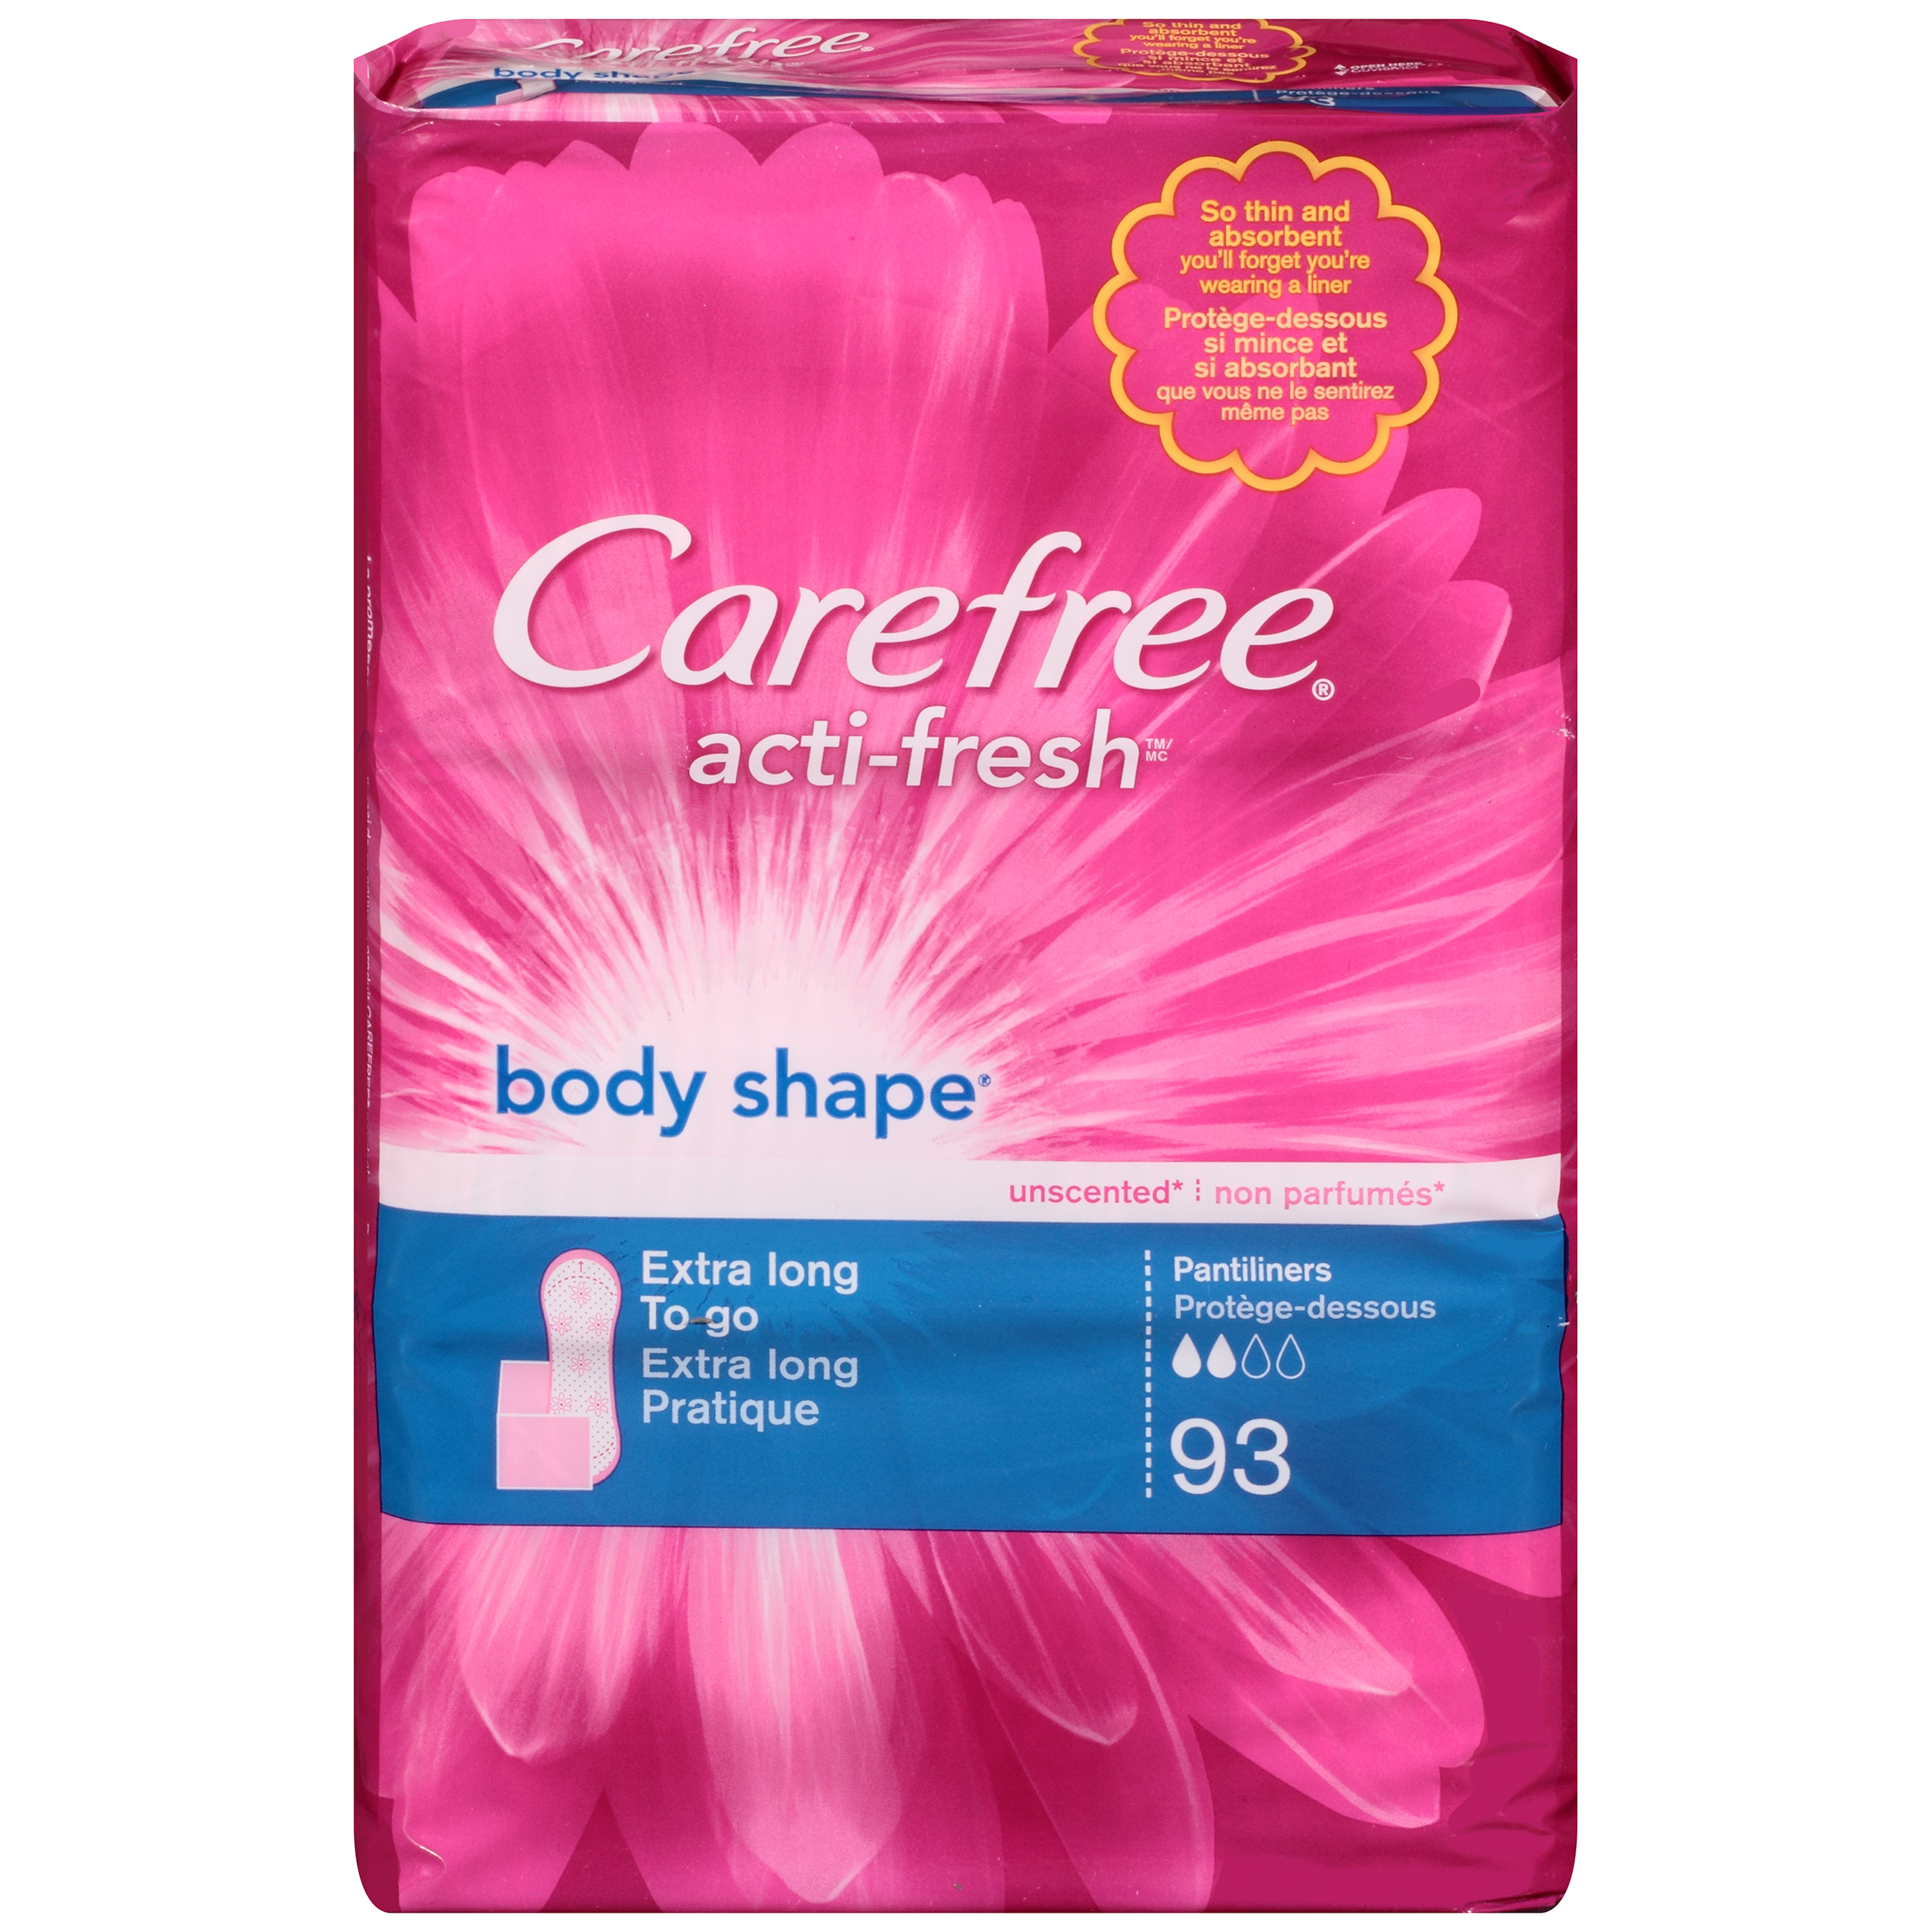 UPC 078300069935 product image for Carefree Acti Fresh Body Shape Extra Long To Go Pantiliners 93 CT PACK - PLAYTEX | upcitemdb.com